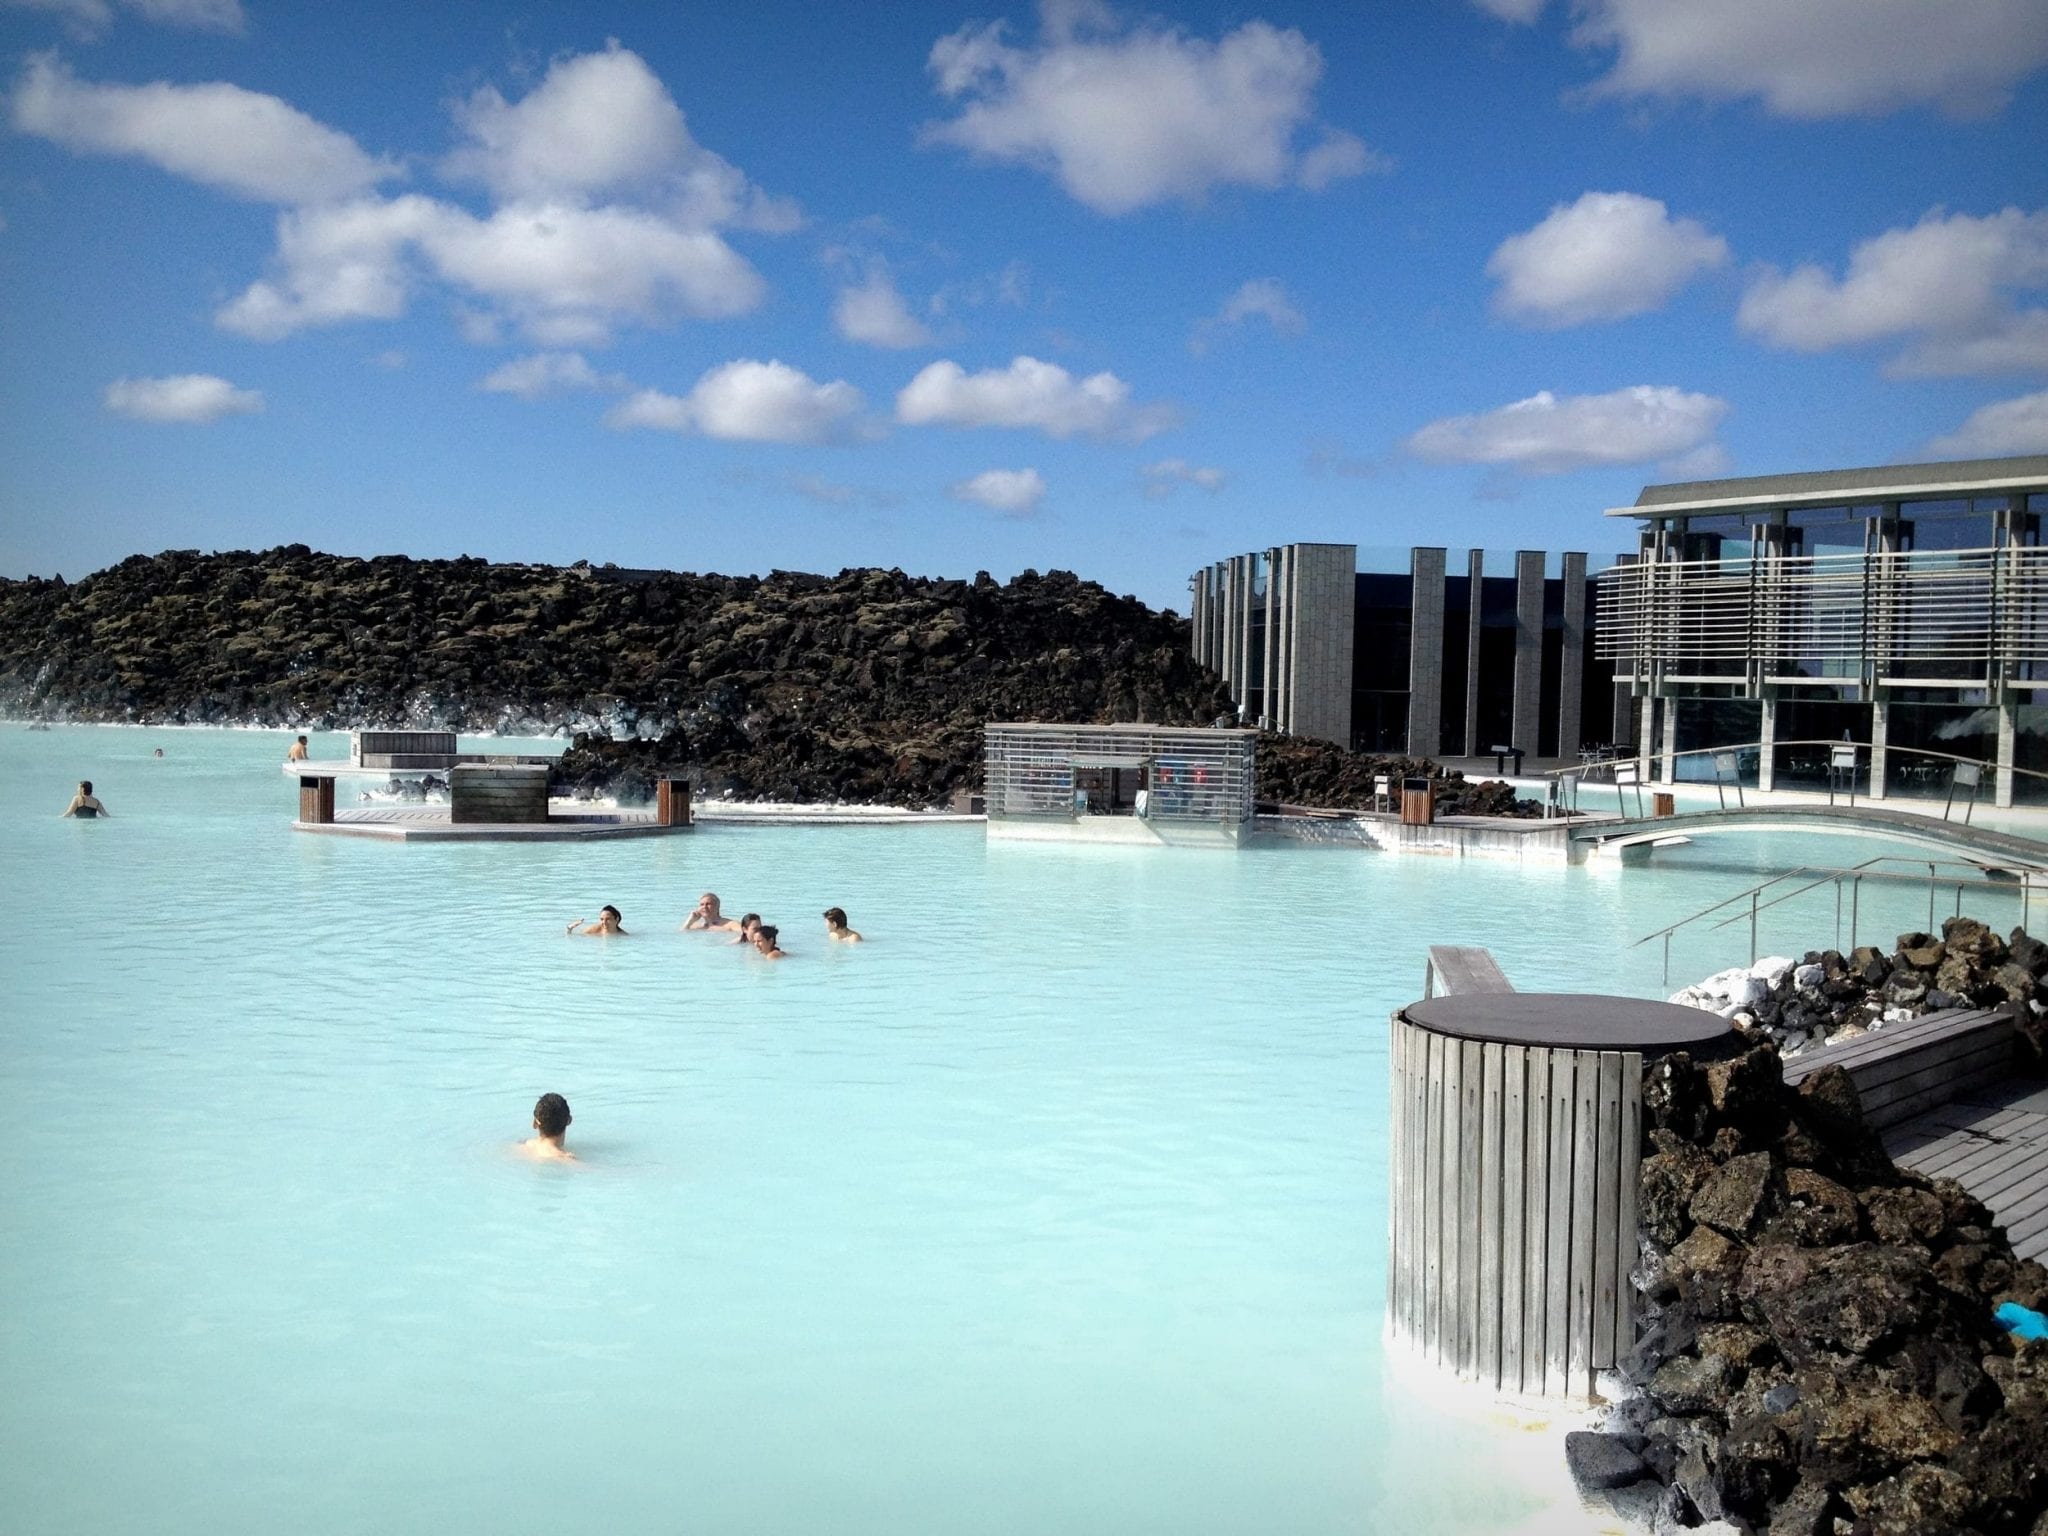 Things No One Tells You About the Blue Lagoon - Adventurous Kate